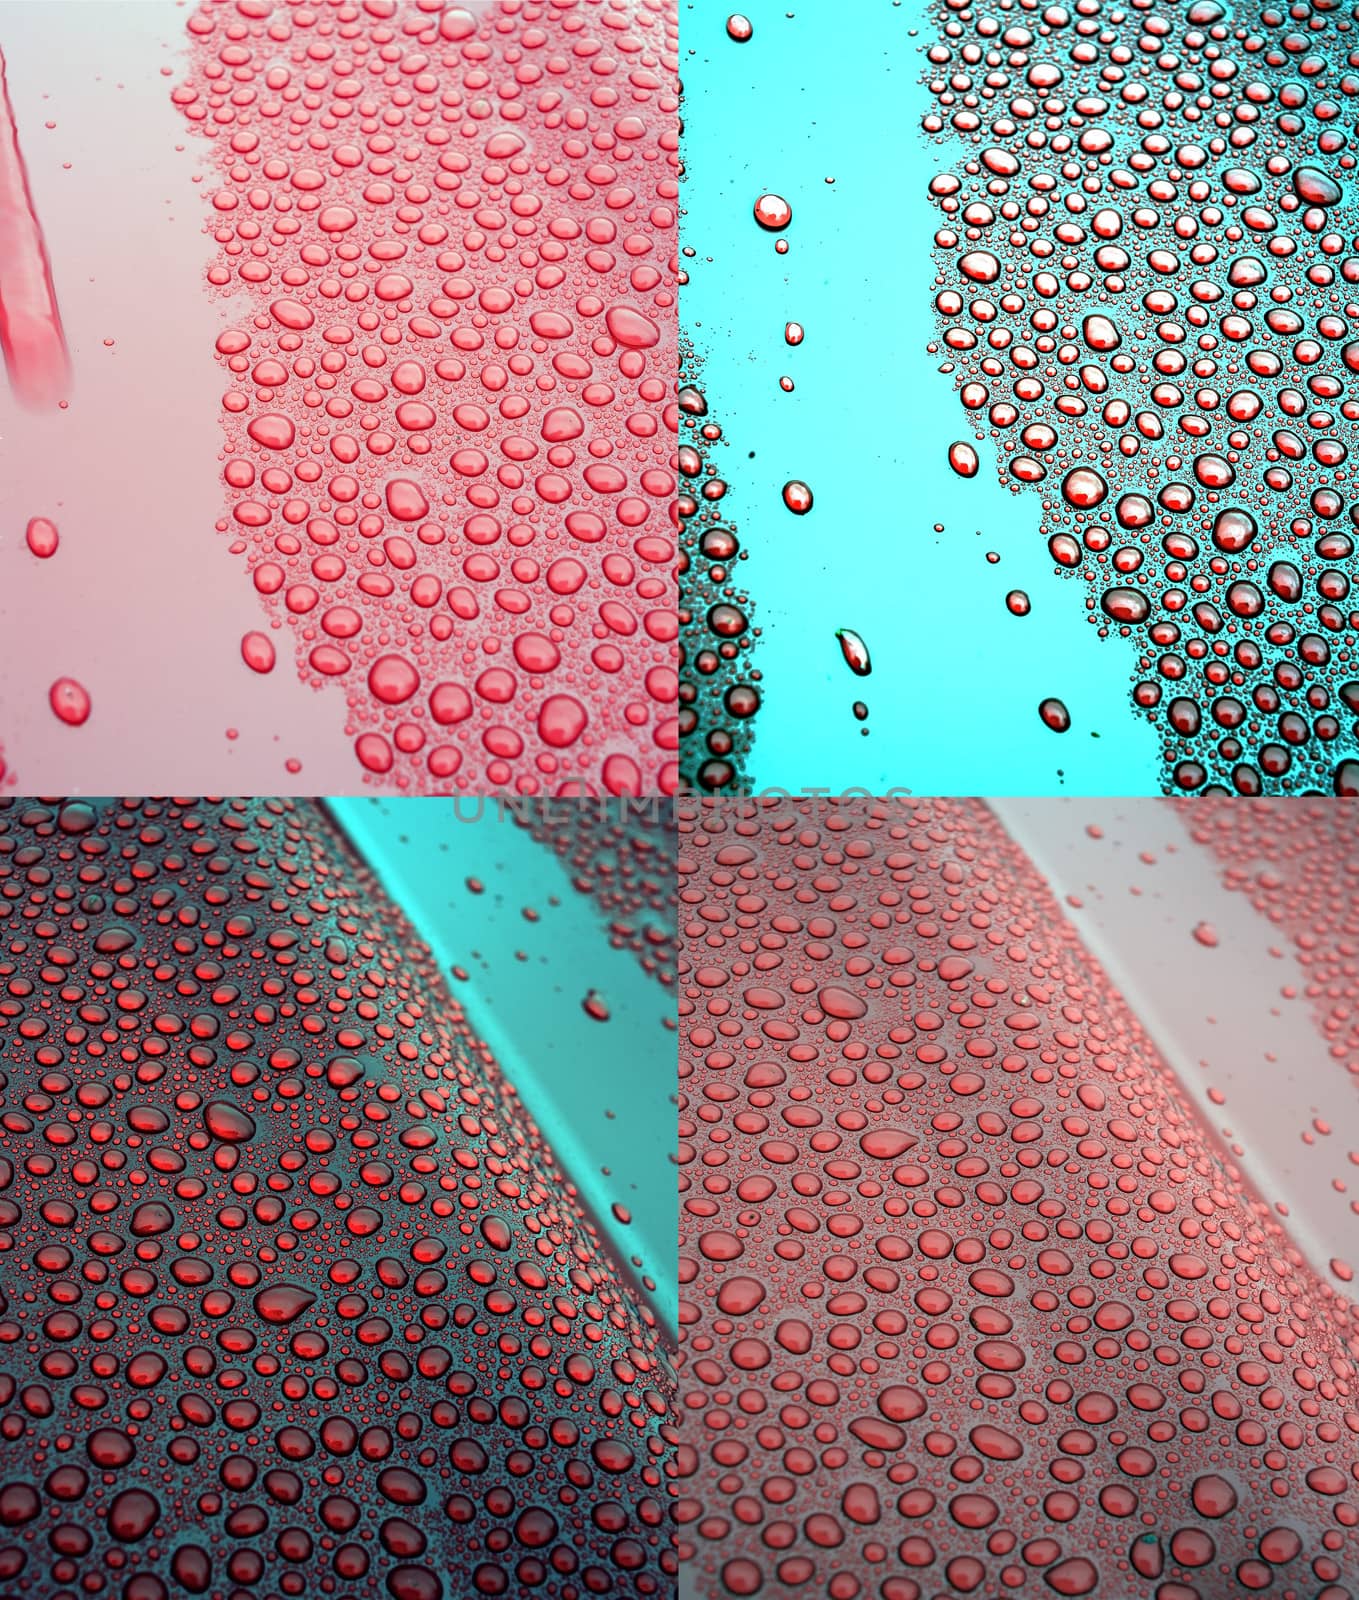 Four background from water drops by Krakatuk